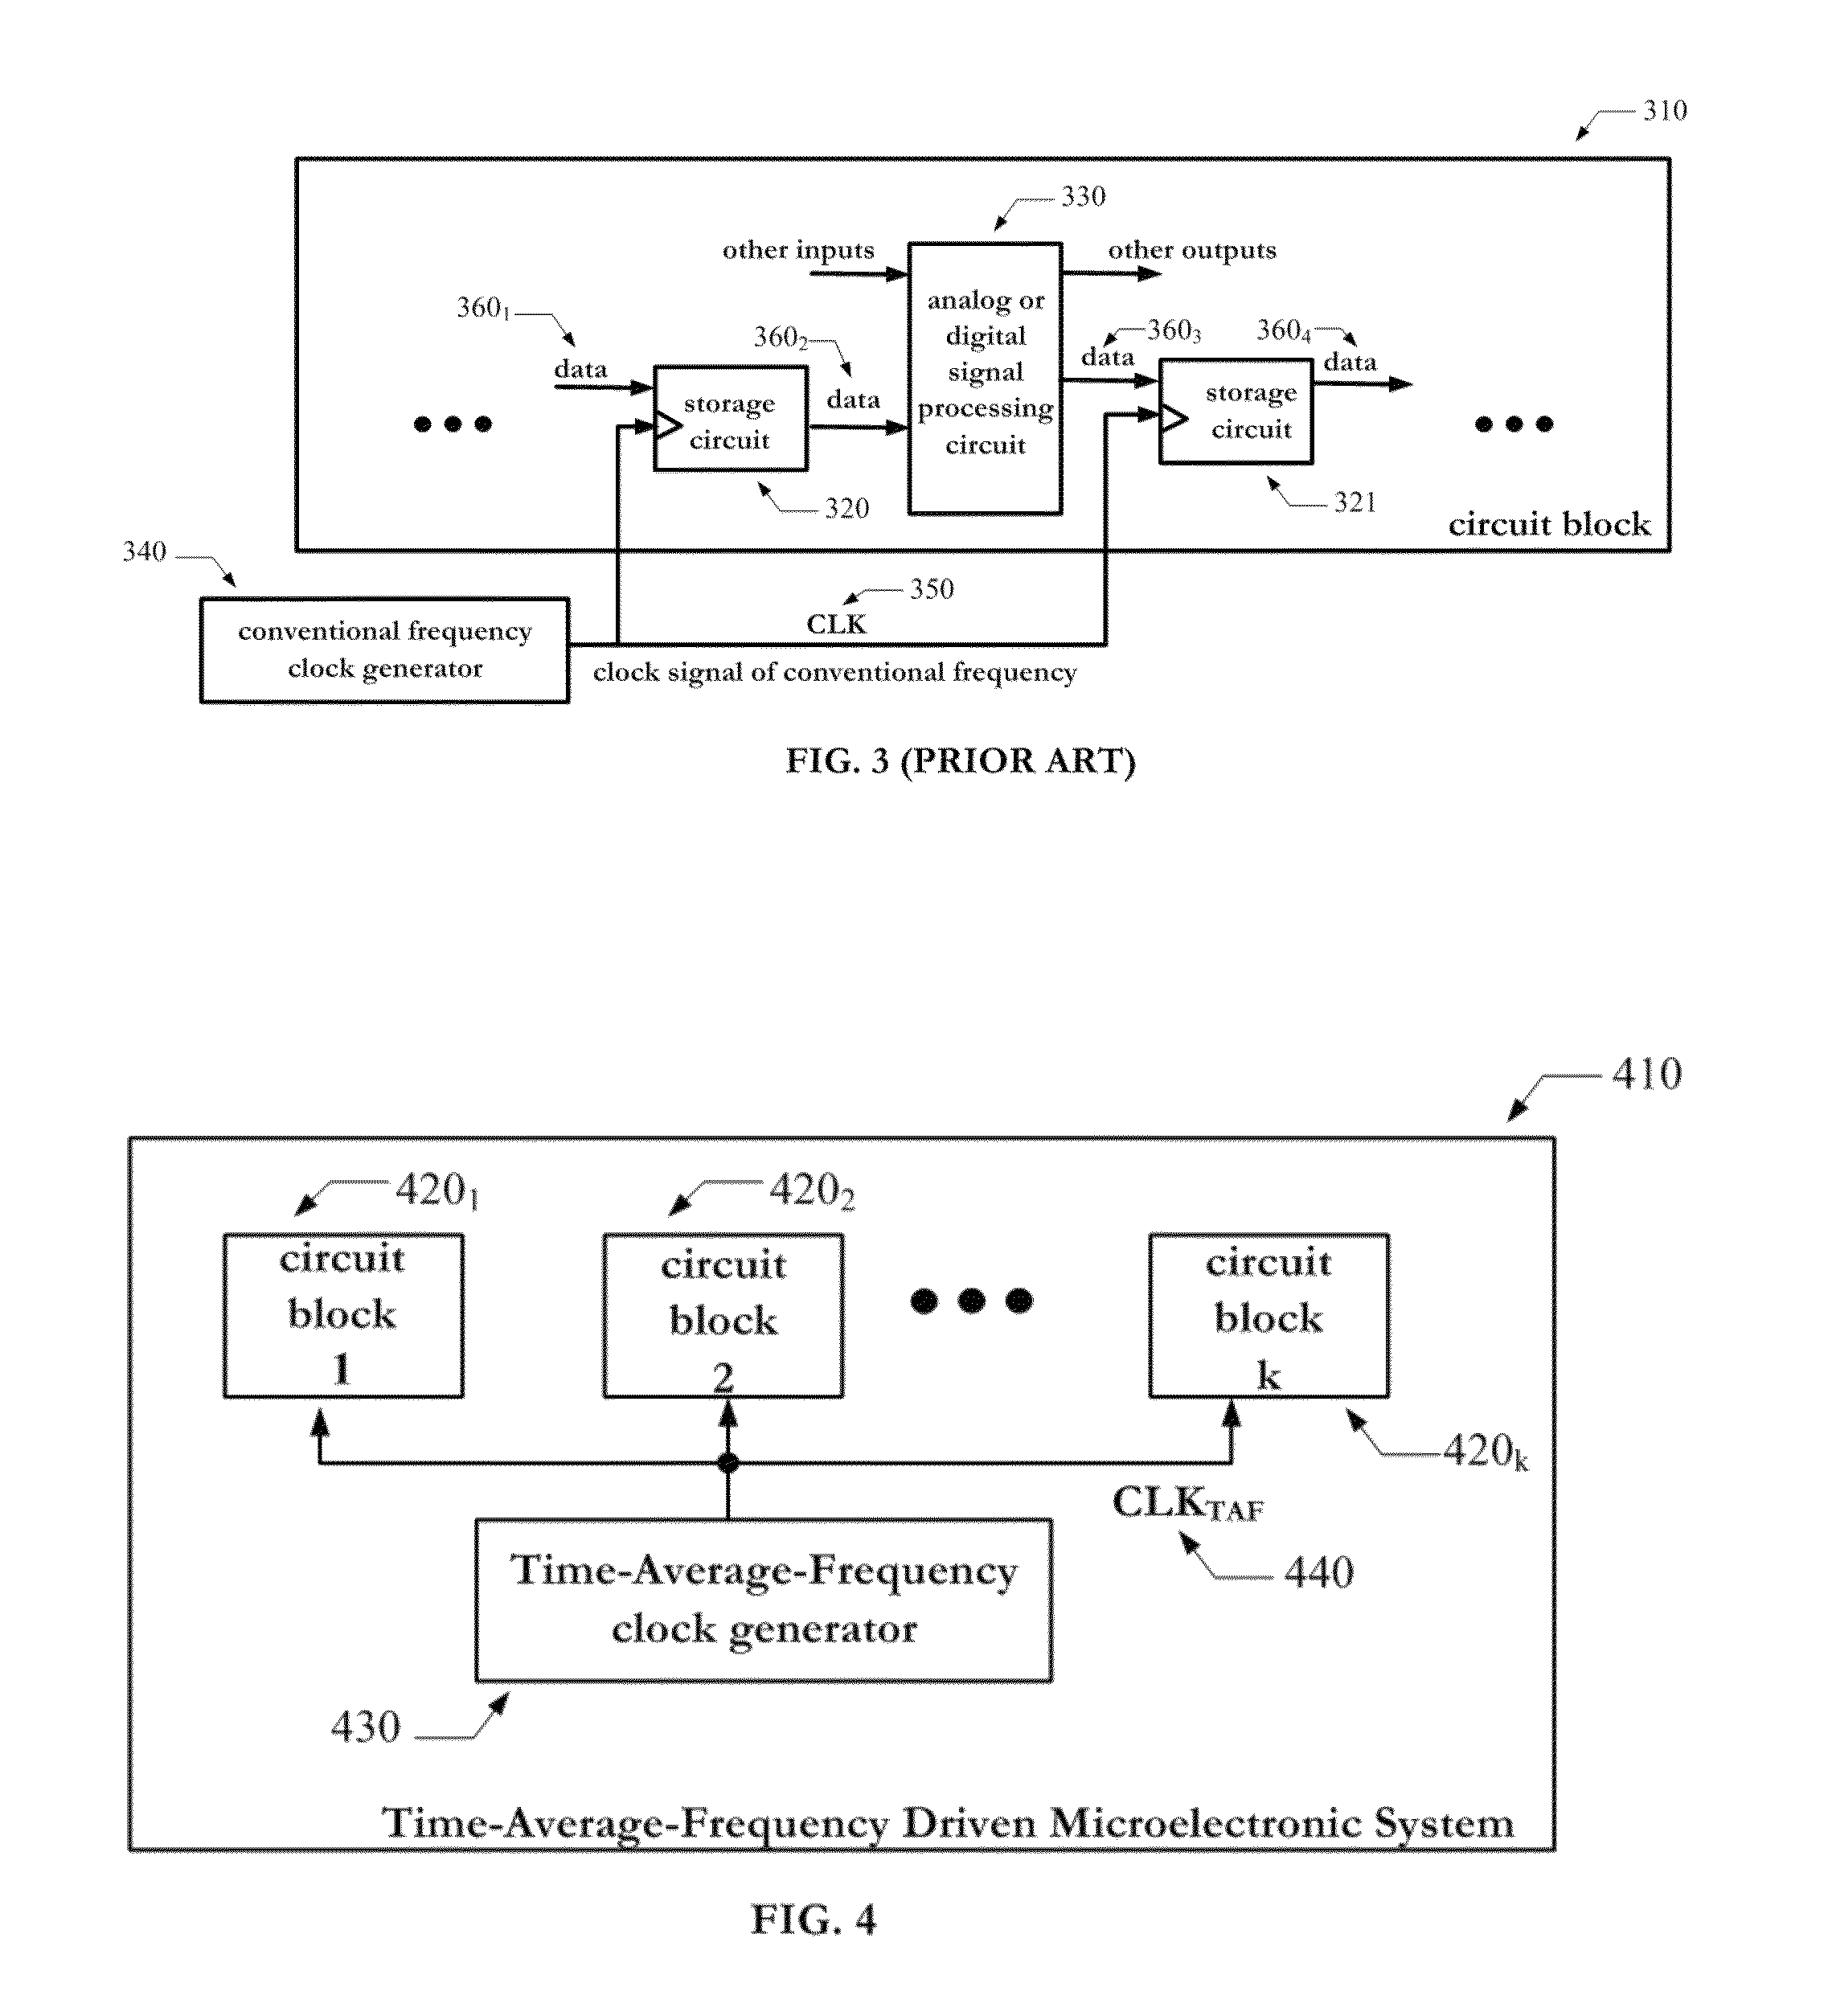 Microelectronic system using time-average-frequency clock signal as its timekeeper